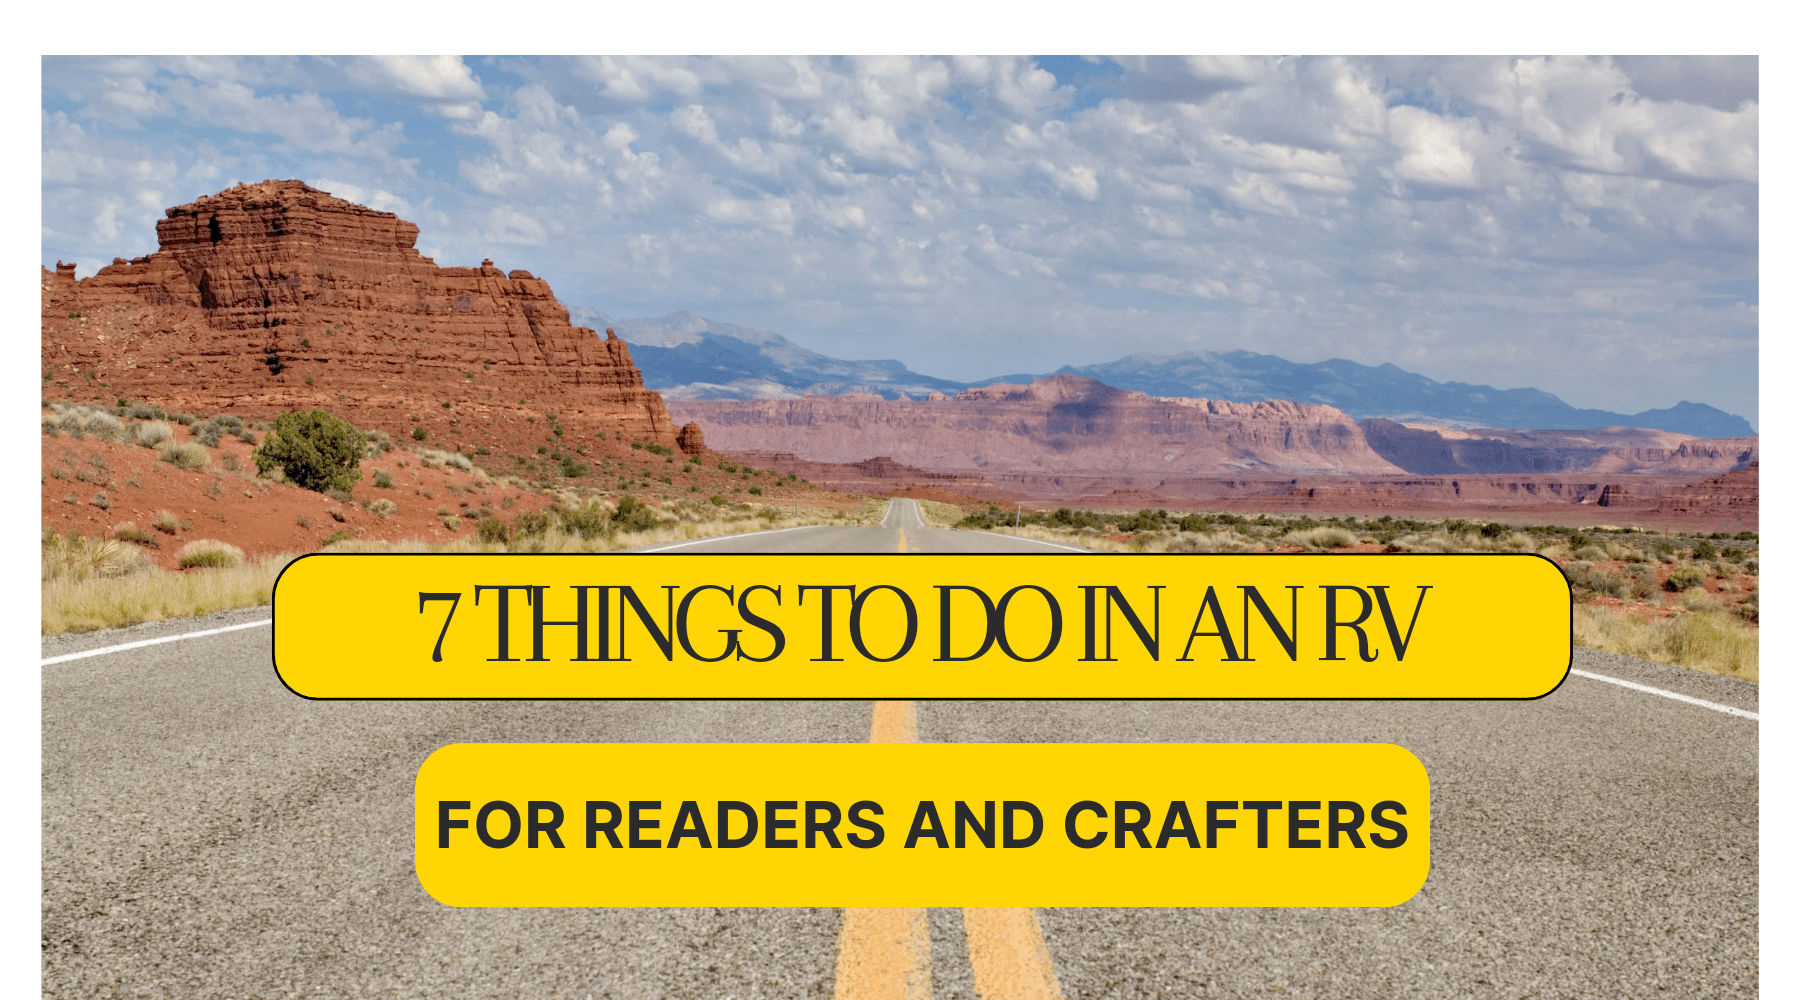 7 Things to Do in a RV for Readers and Crafters - Bookshelf Memories